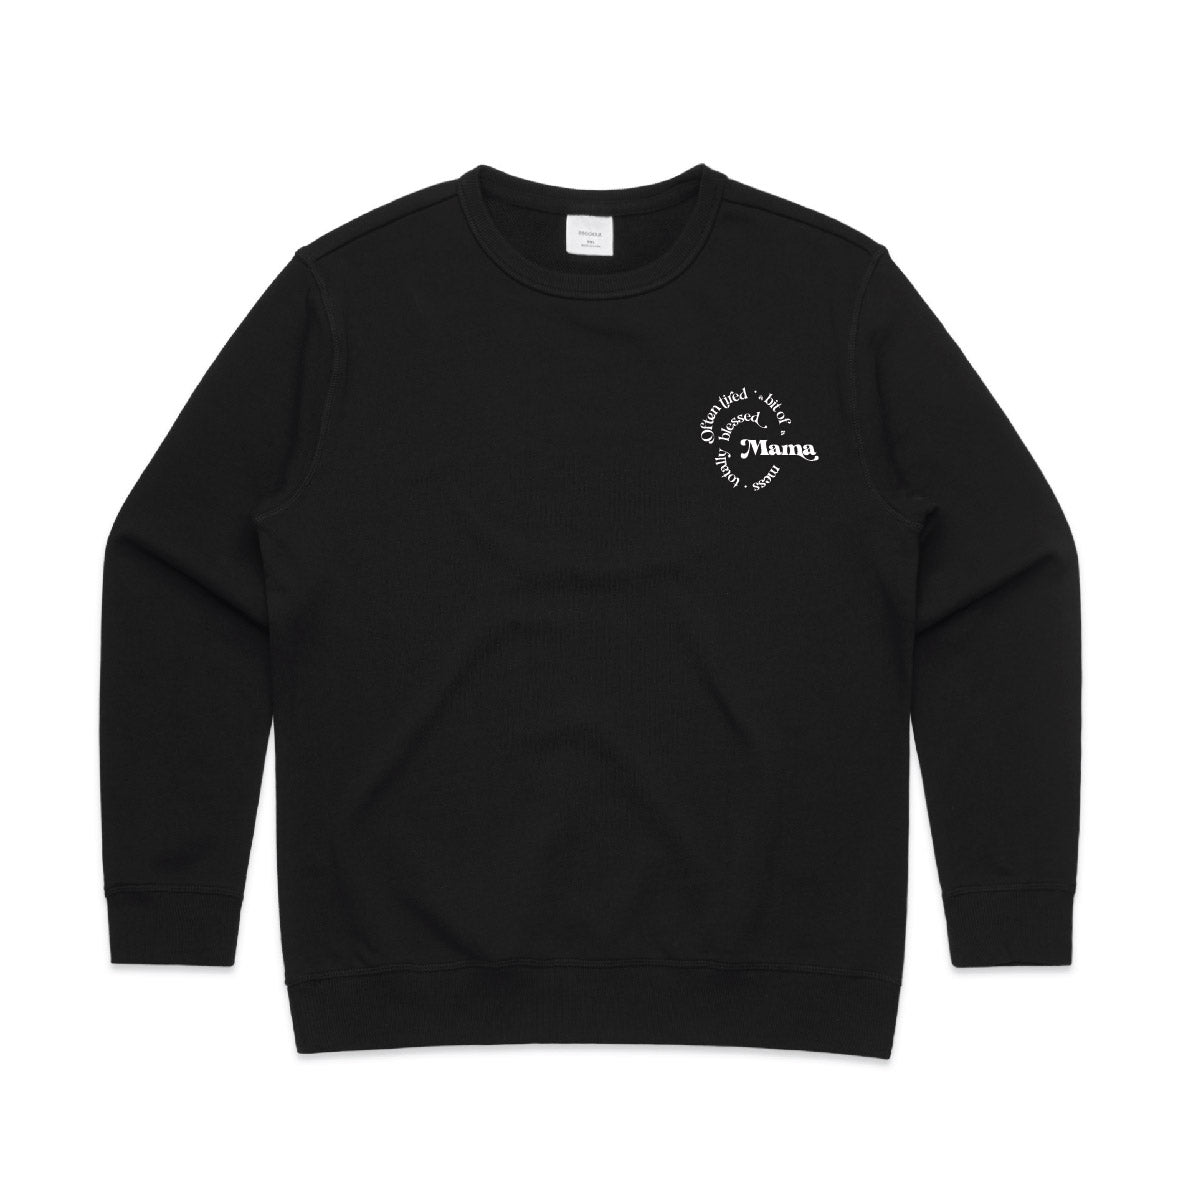 Often tired, a bit of a mess, totally blessed Mama crew neck jumper on black